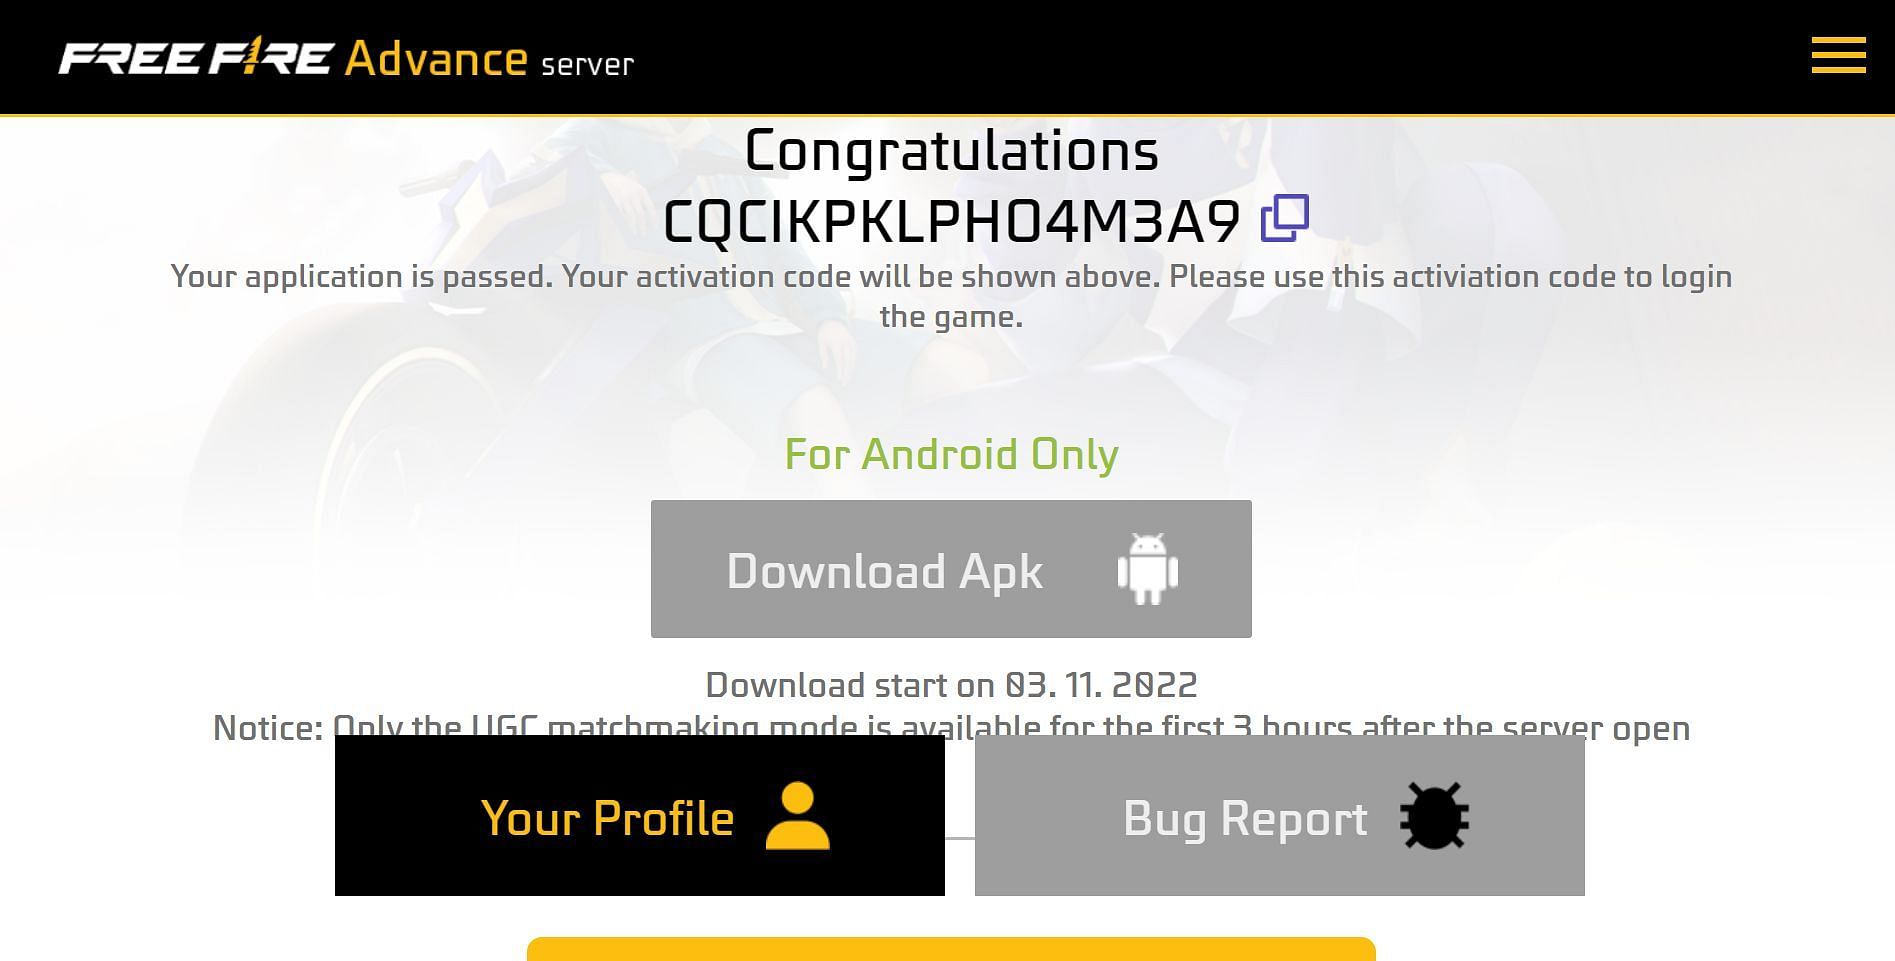 Only selected users will get the Activation Code (Image via Garena)